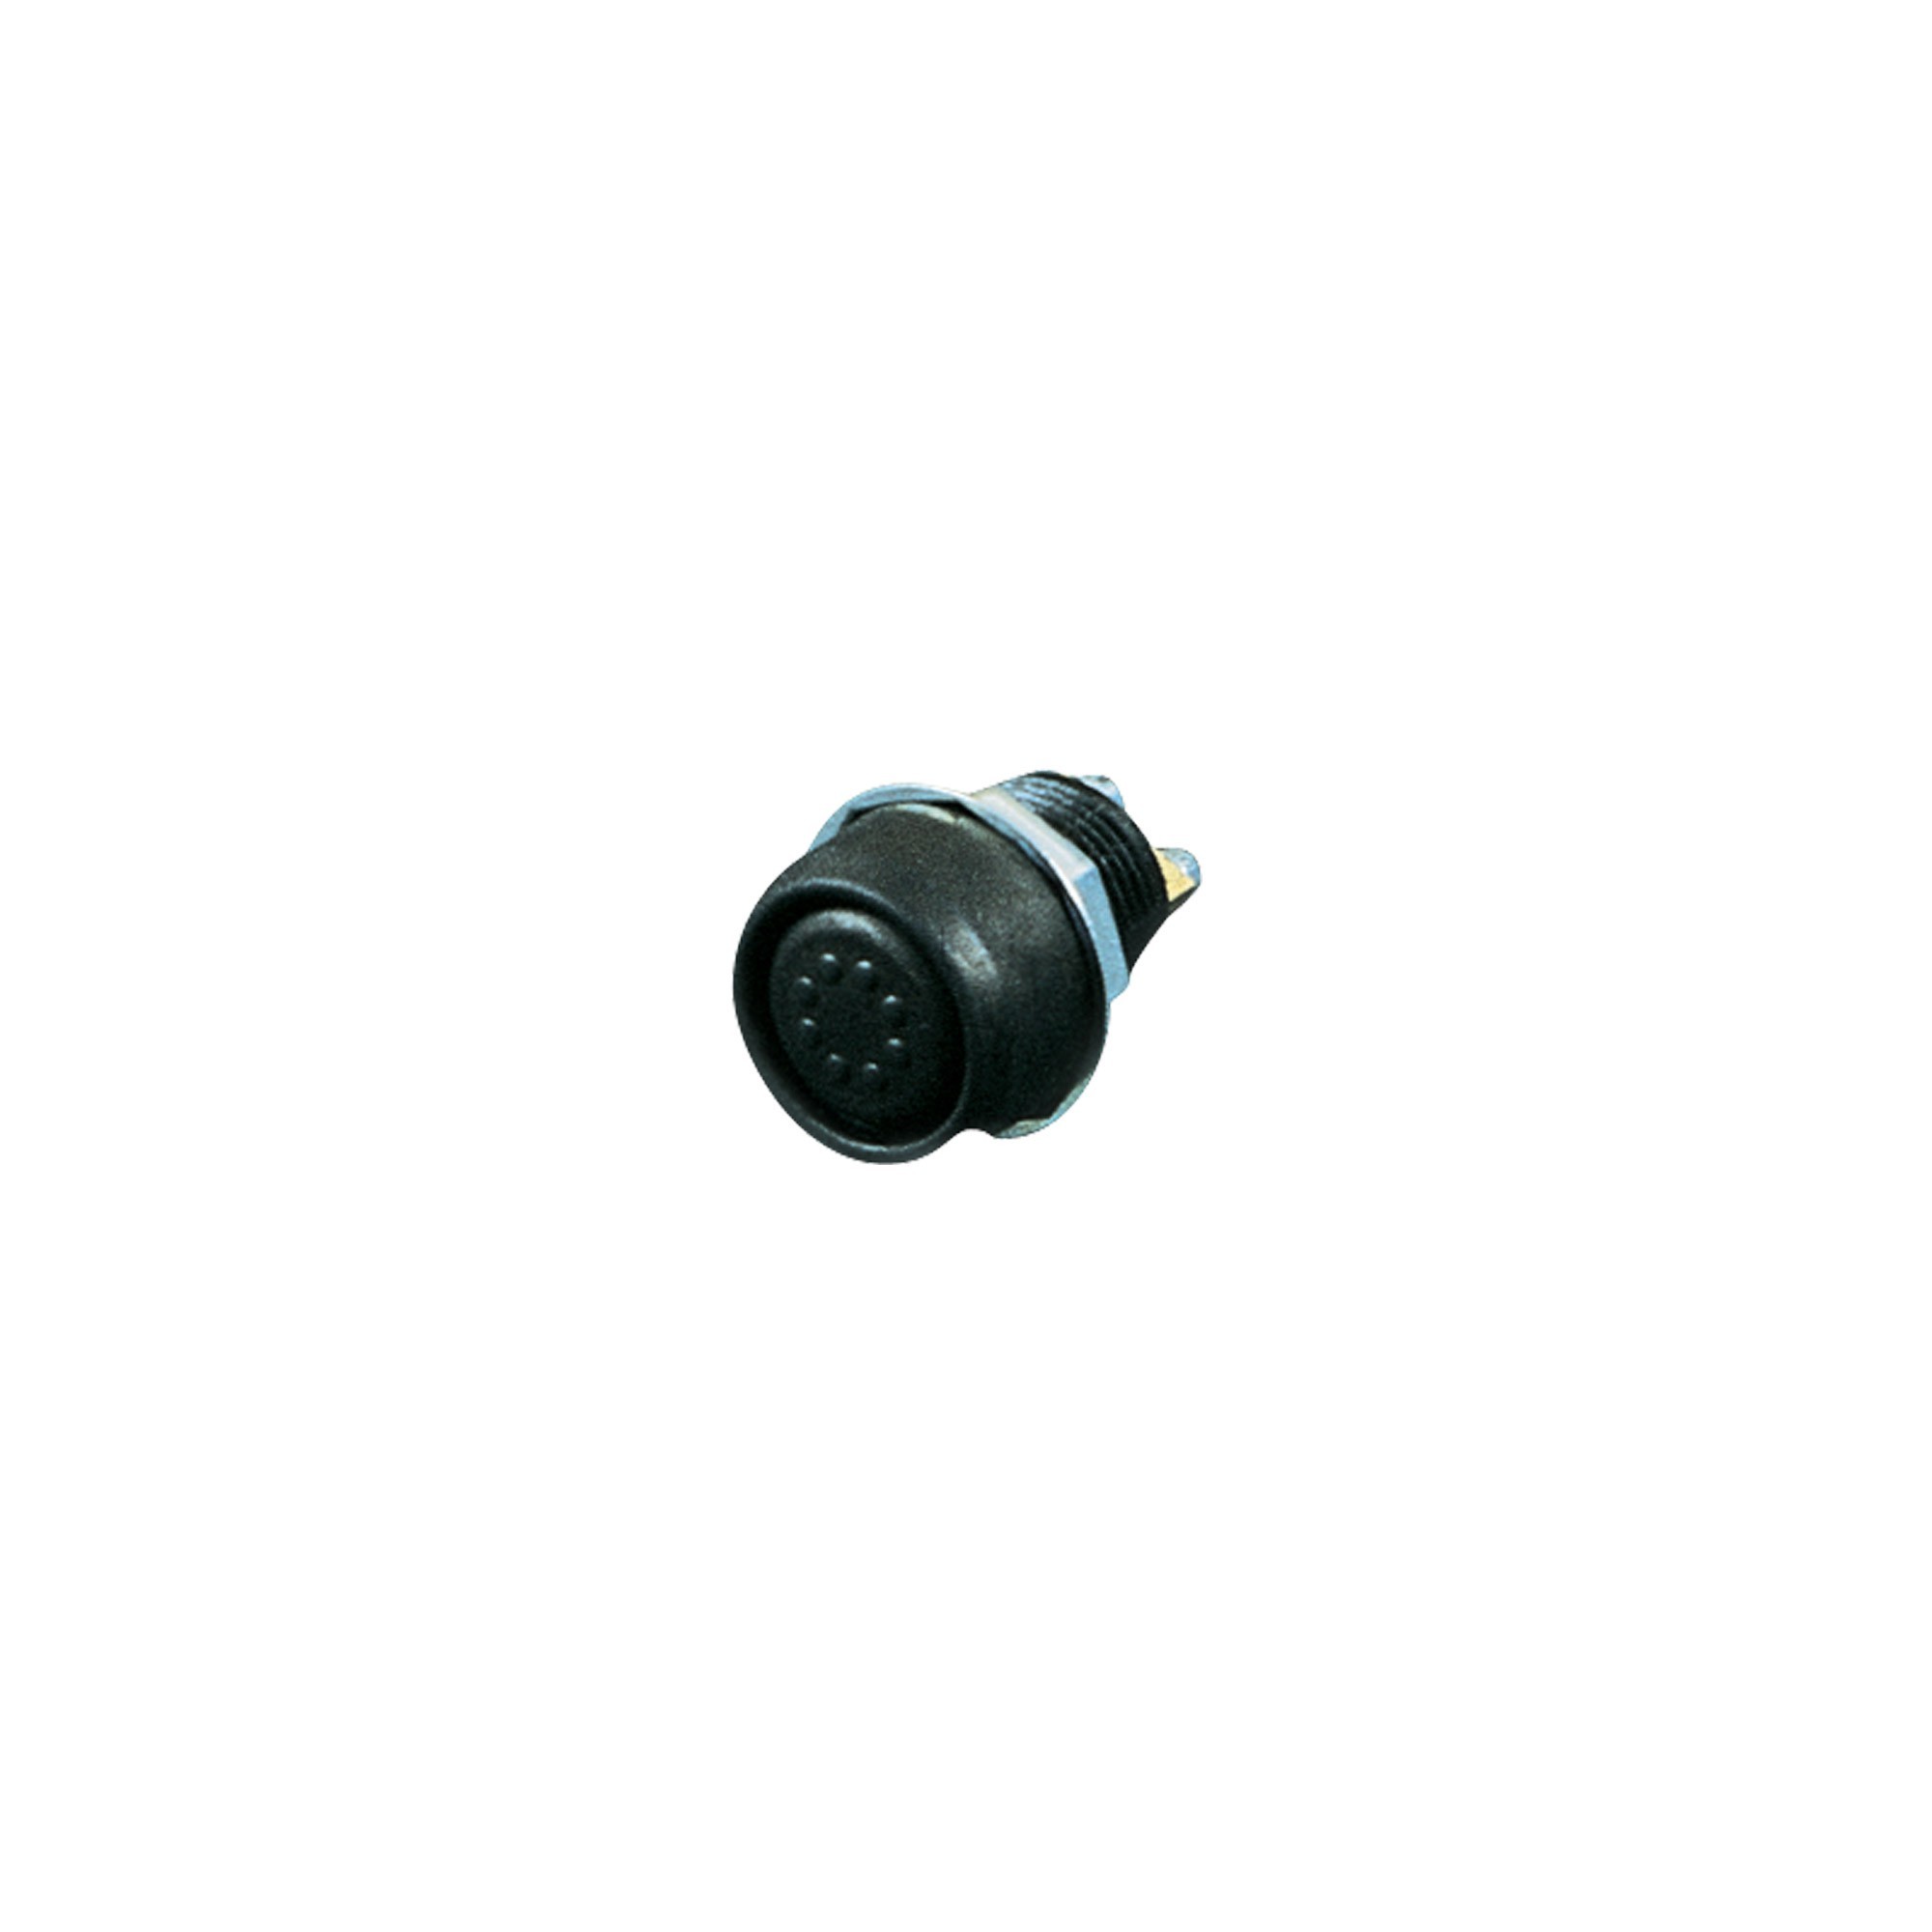 Water-Proof Push Button Switch 13/16in Hole - EA0-0467